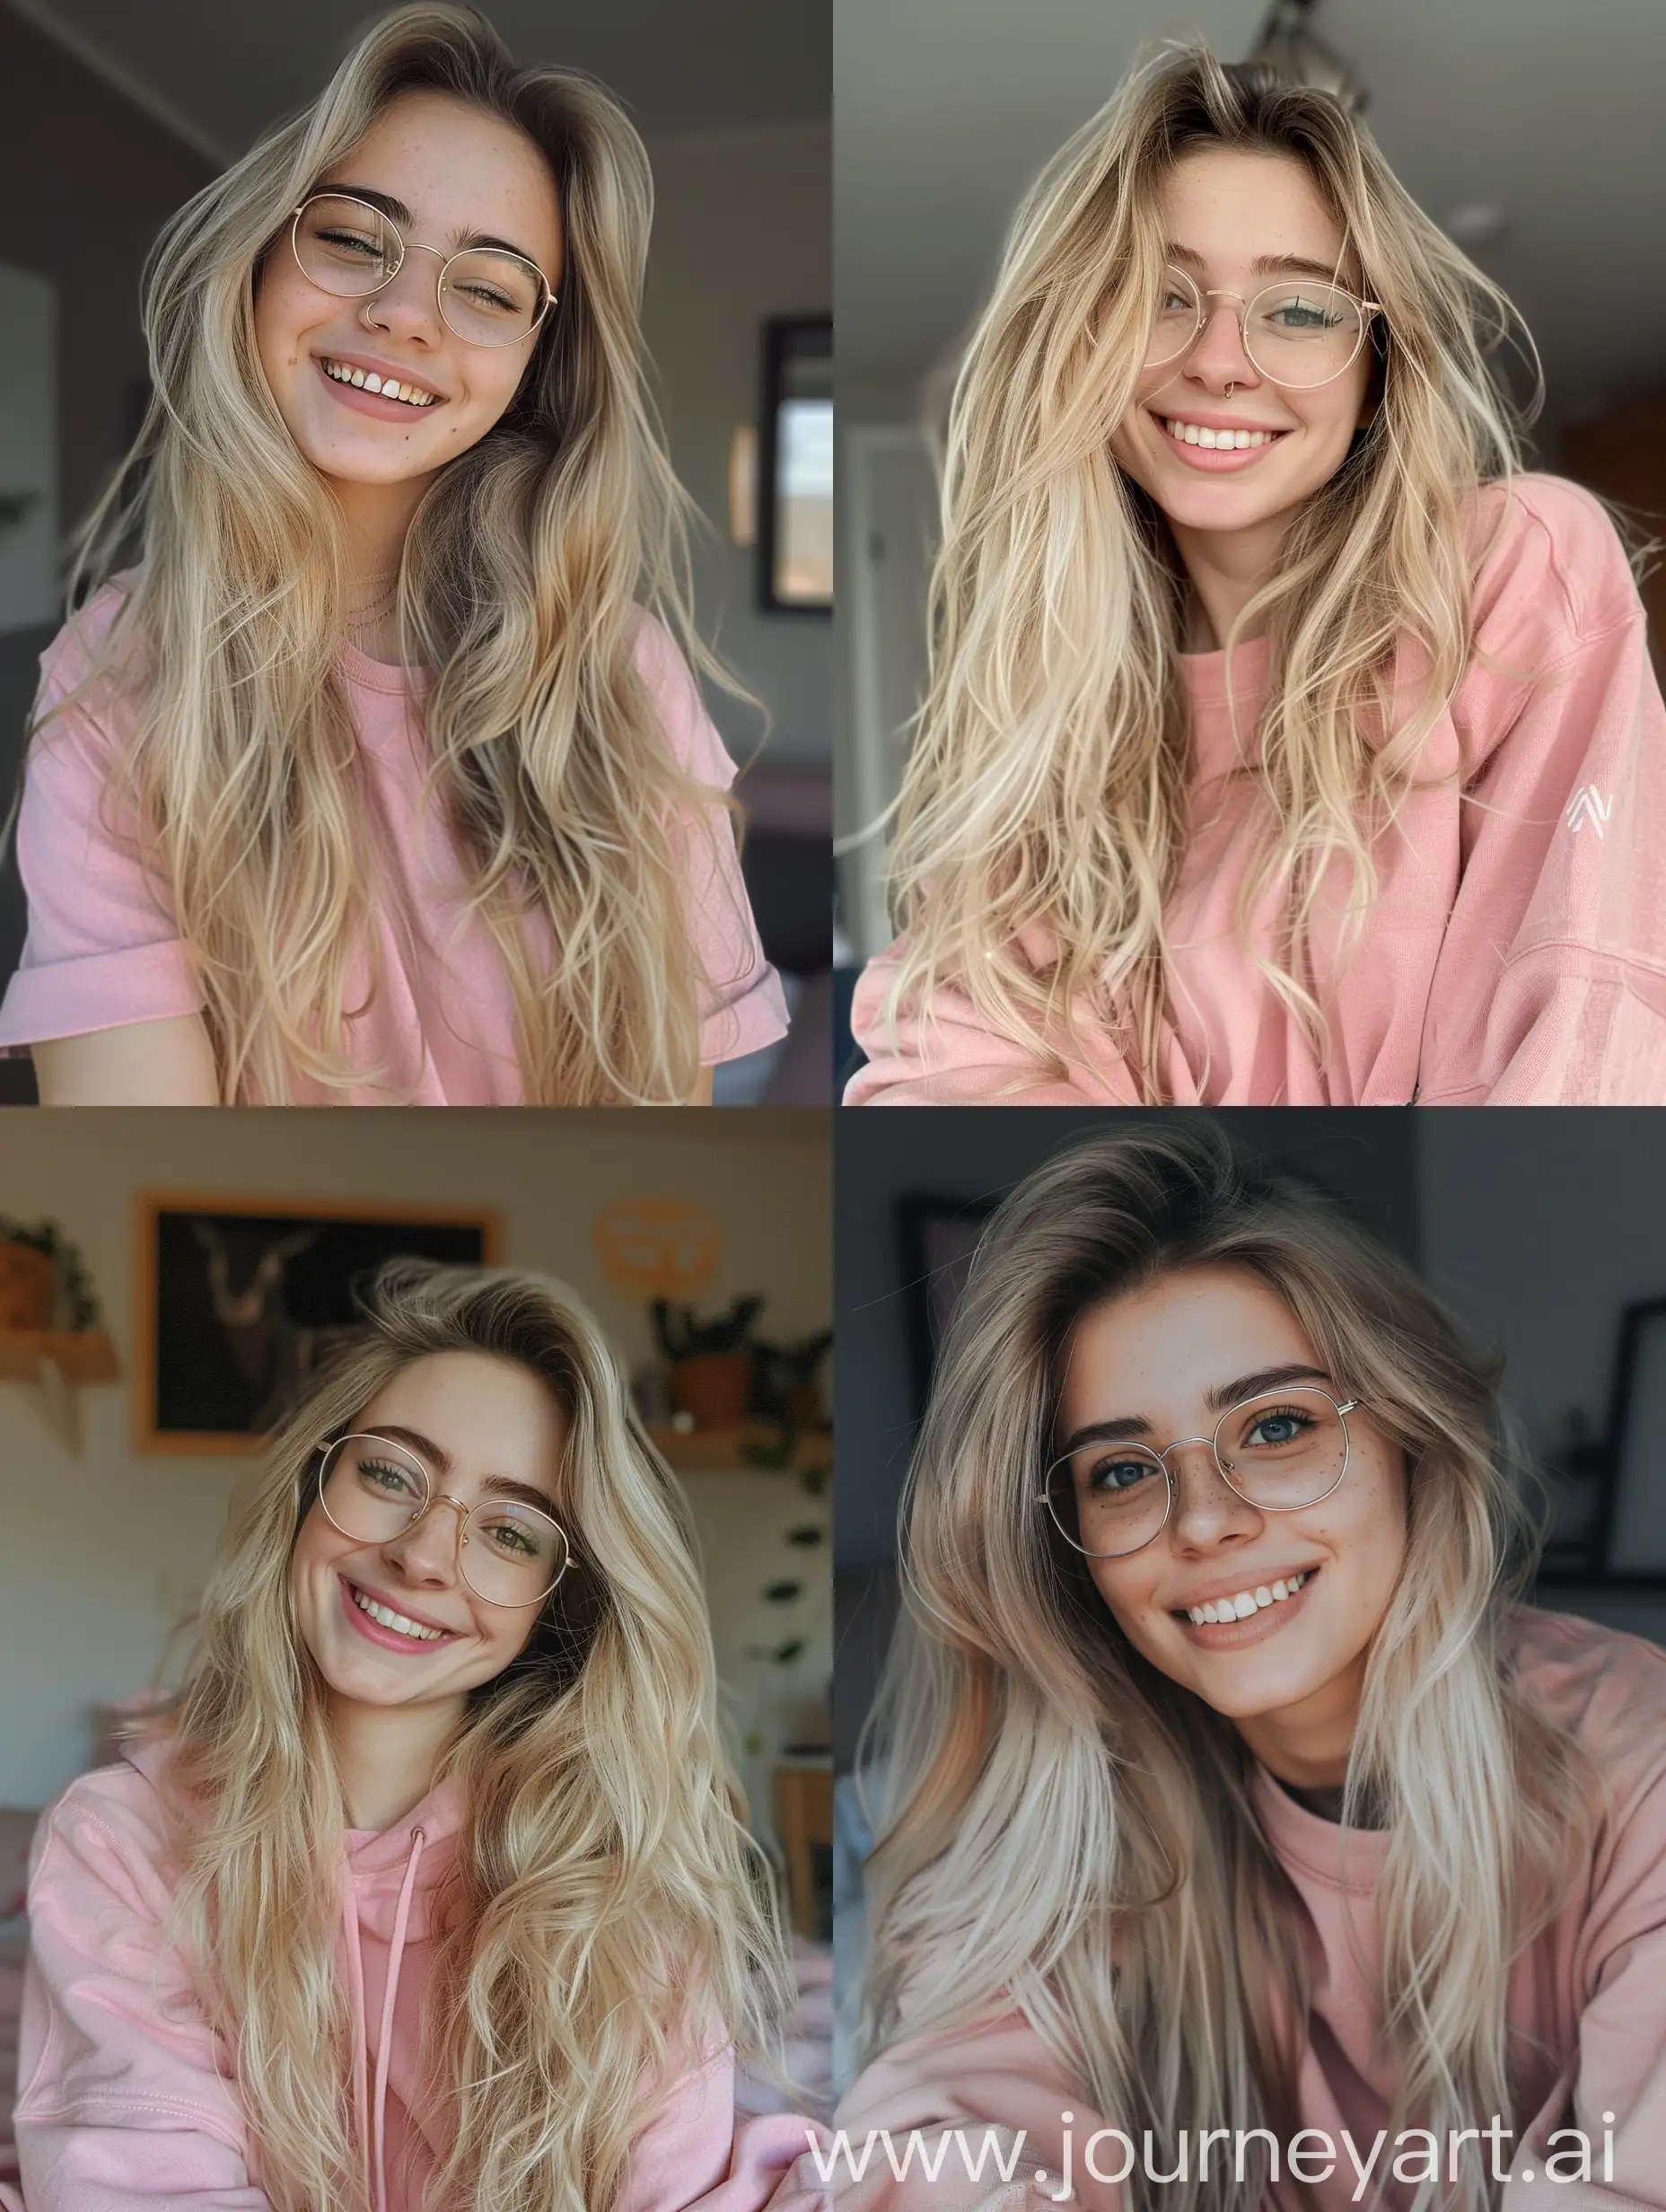 Smiling-22YearOld-Influencer-in-Natural-Makeup-and-Pink-Clothing